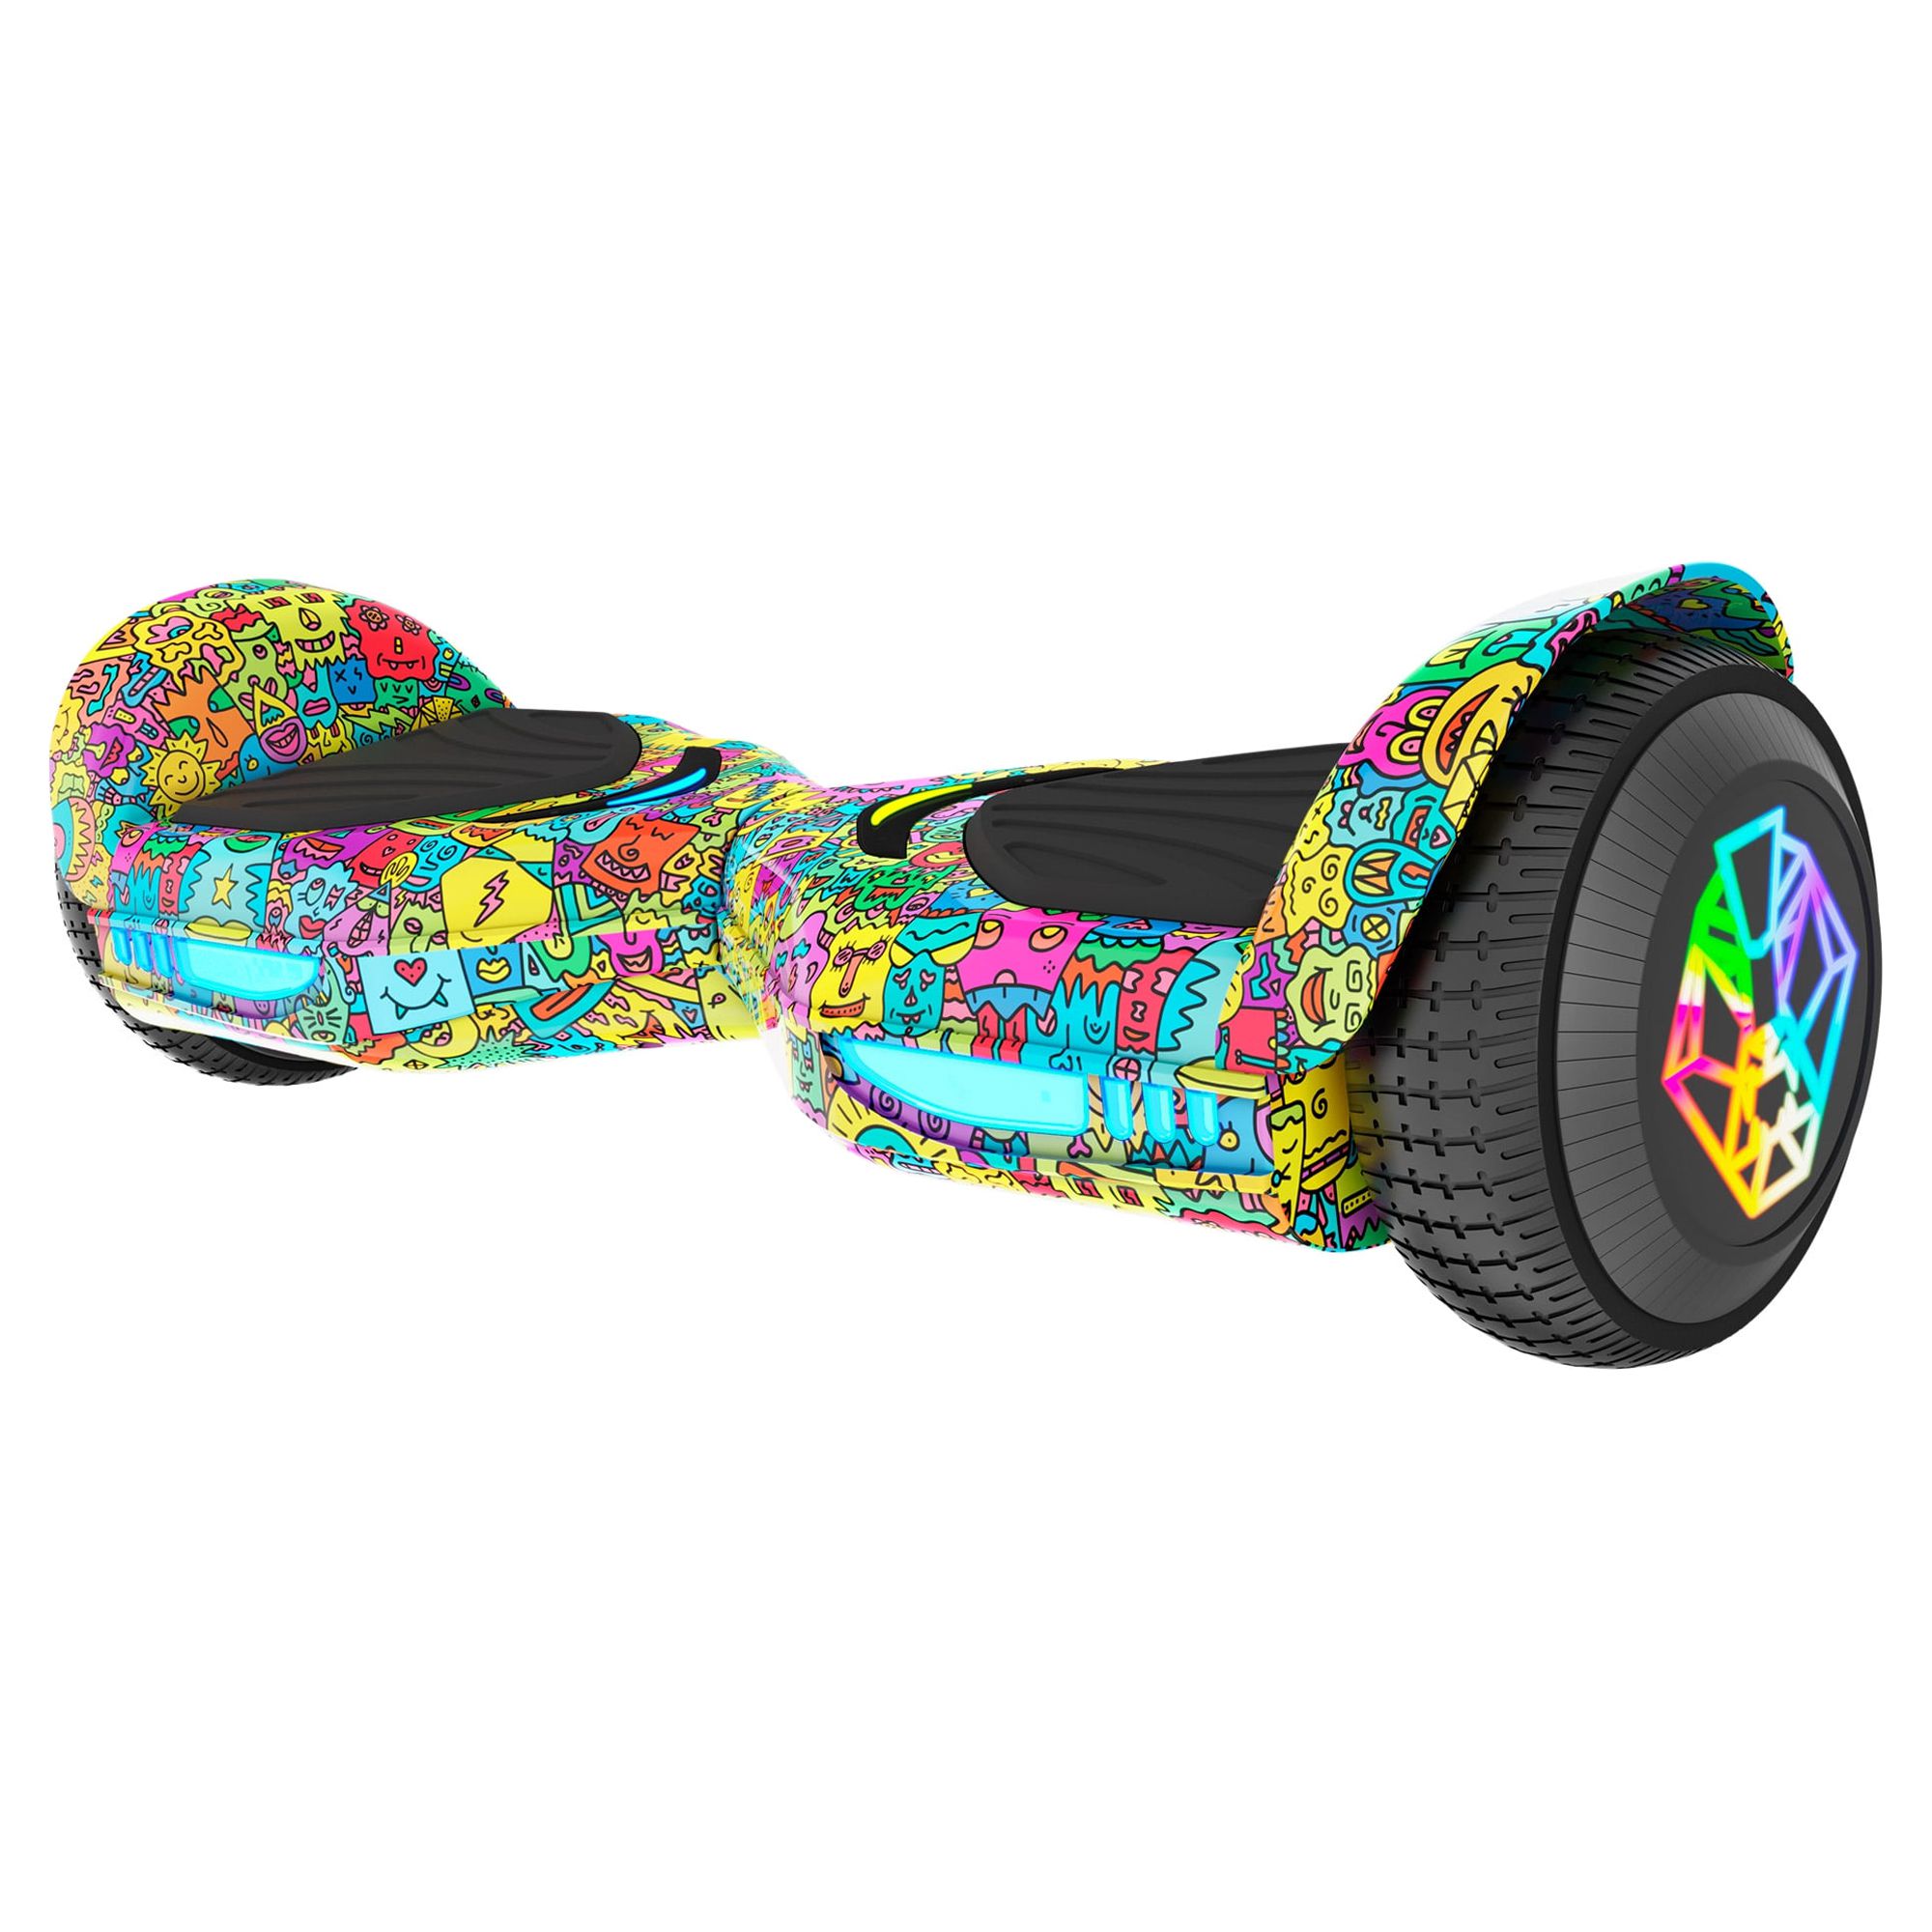 Swagtron Multicolor SwagBOARD EVO Freestyle Hoverboard Bluetooth Speaker Light-Up Wheels, 7 MPH Max Speed - image 1 of 9